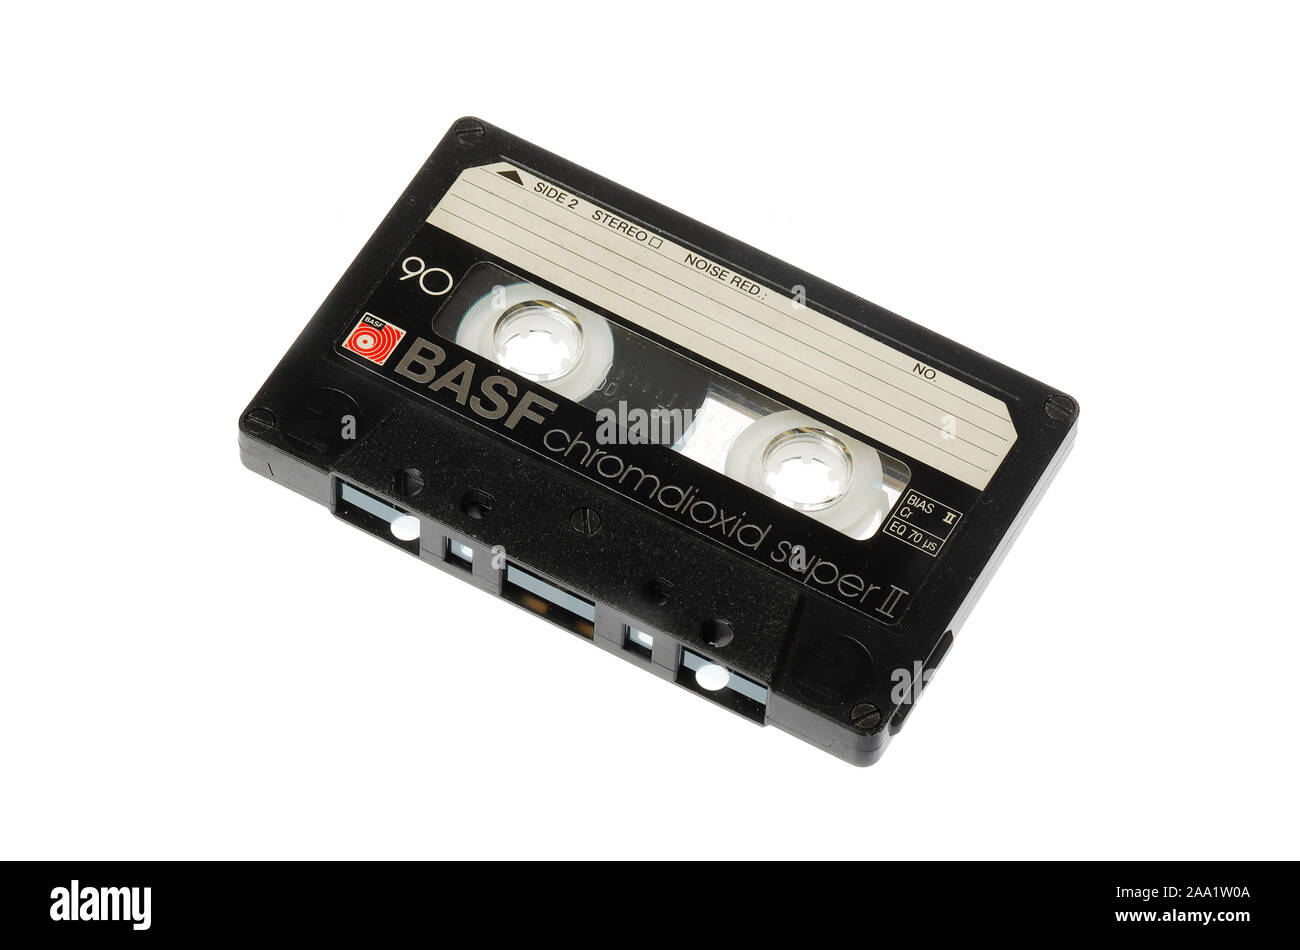 Stockholm, Sweden - November 11, 2019: One 1980s BASF chromdioxid super II audio compact cassette tape made in West Germany isolated on white backgrou Stock Photo